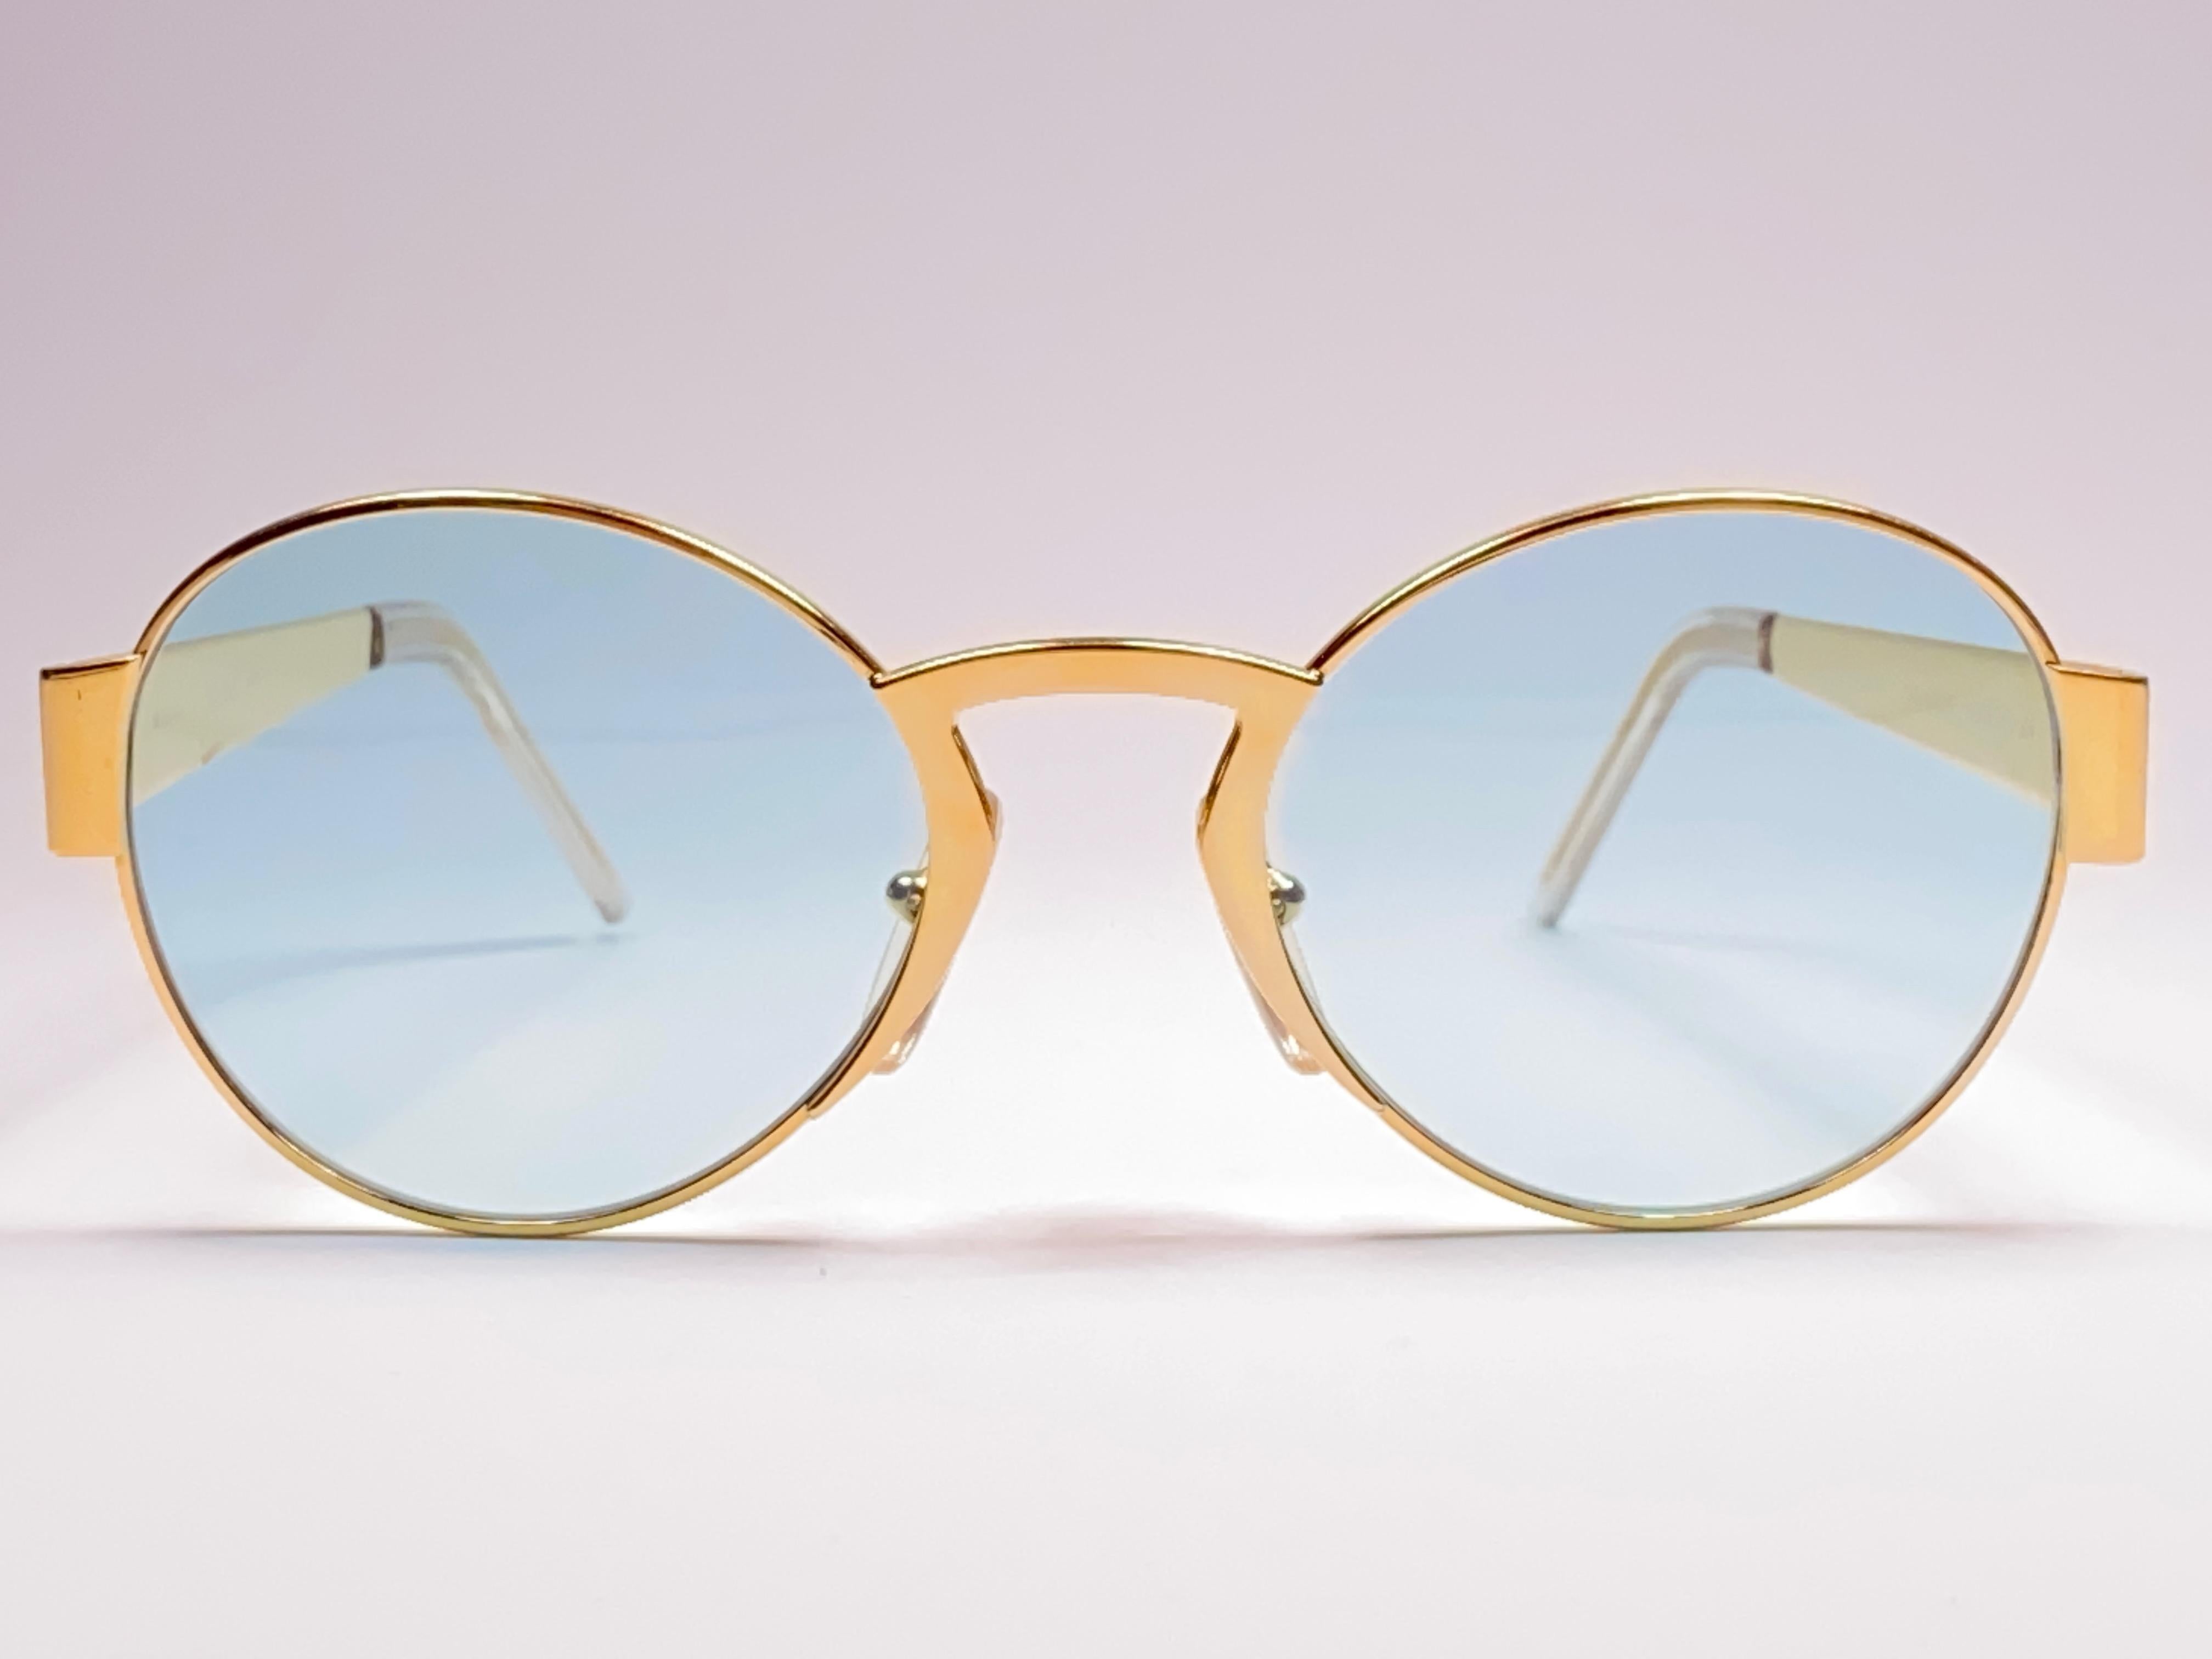 New Vintage Moschino medium size round frame. Spotless light blue lenses.

Made in Italy.
 
Produced and design in 1990's.

This item may show minor sign of wear due to storage.